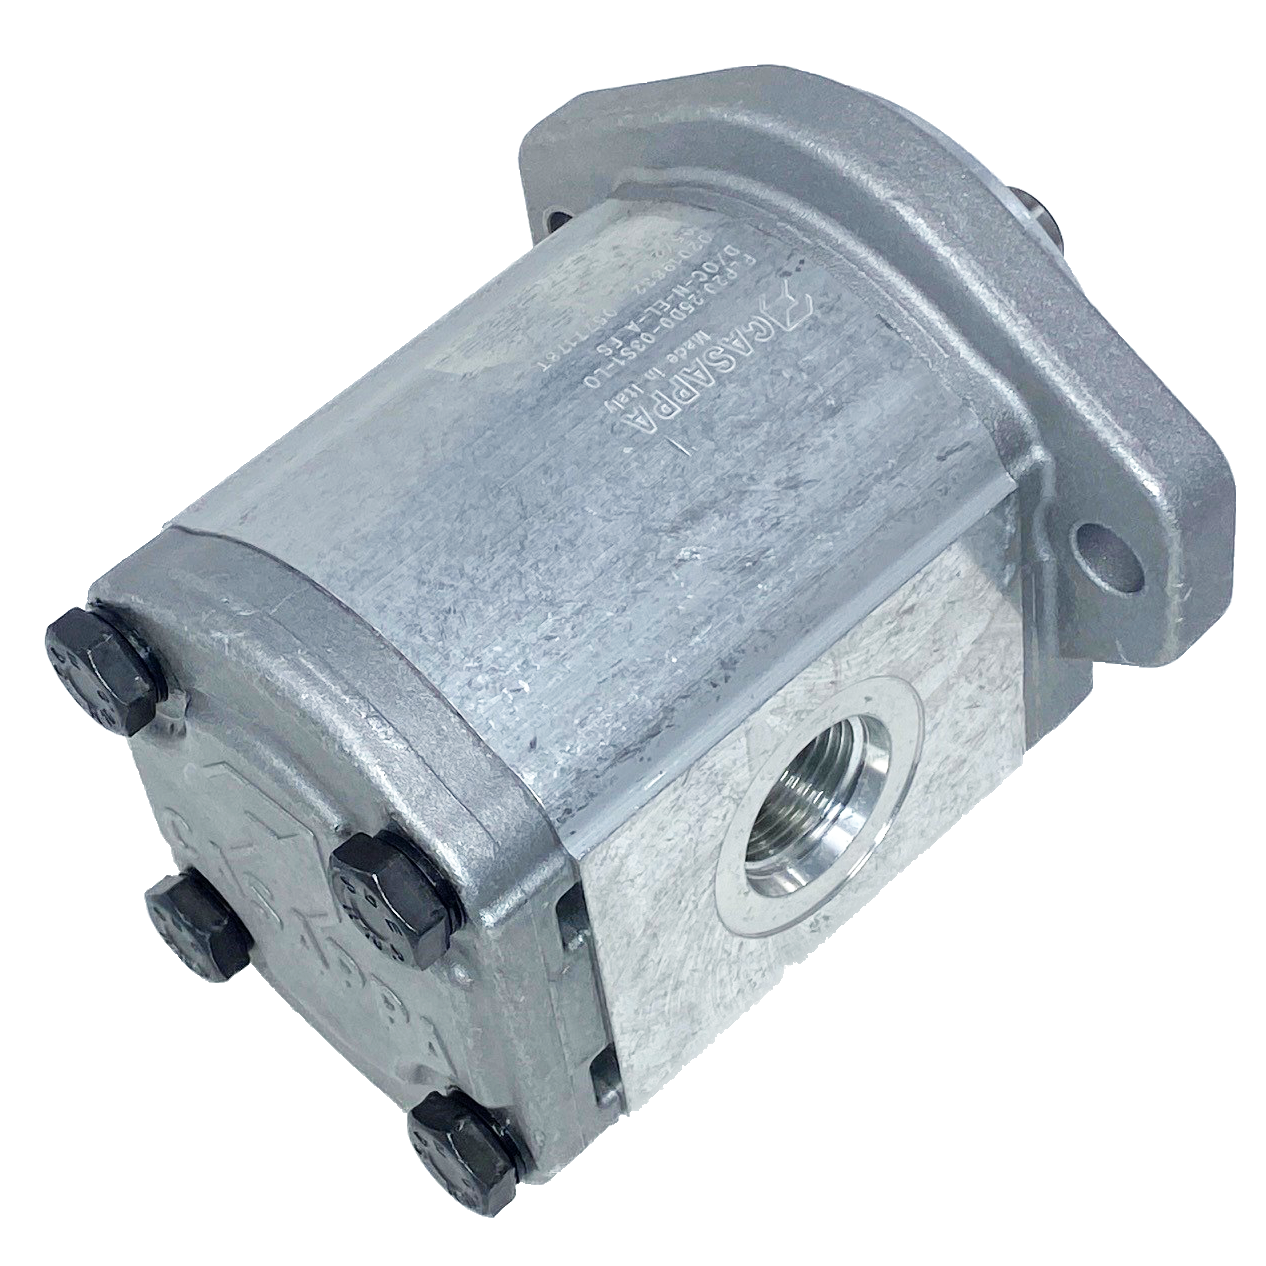 PHP20.31,5S0-31S9-LOG/OC-N-EL : Casappa Polaris Gear Pump, 33.03cc, 2900psi Rated, 2500RPM, CCW, 5/8" Bore x 5/32" Key Shaft, SAE A 2-Bolt Flange, 1.25" #20 SAE Inlet, 0.625 (5/8") #10 SAE Outlet, Cast Iron Body, Aluminum Flange